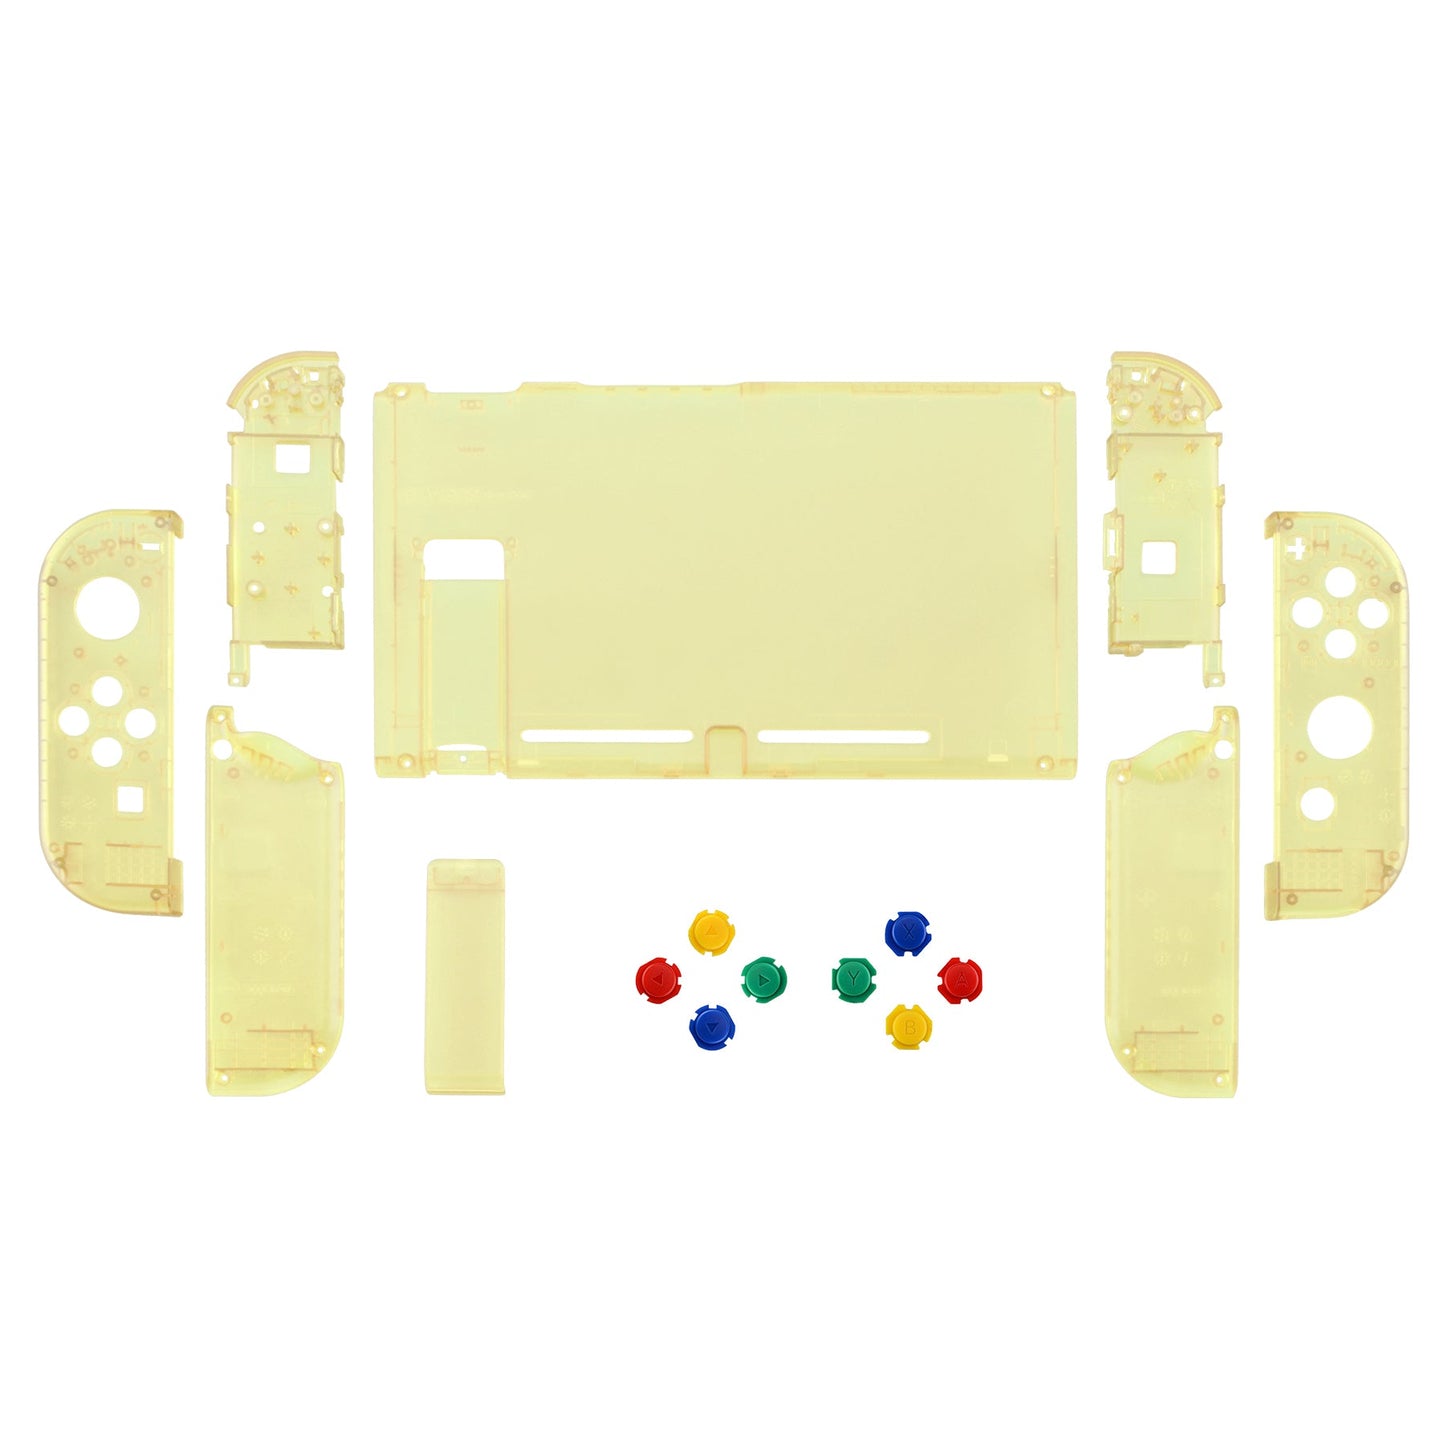 eXtremeRate Retail Back Plate for Nintendo Switch Console, NS Joycon Handheld Controller Housing with Colorful Buttons, DIY Replacement Shell for Nintendo Switch -Amber Yellow - QM509